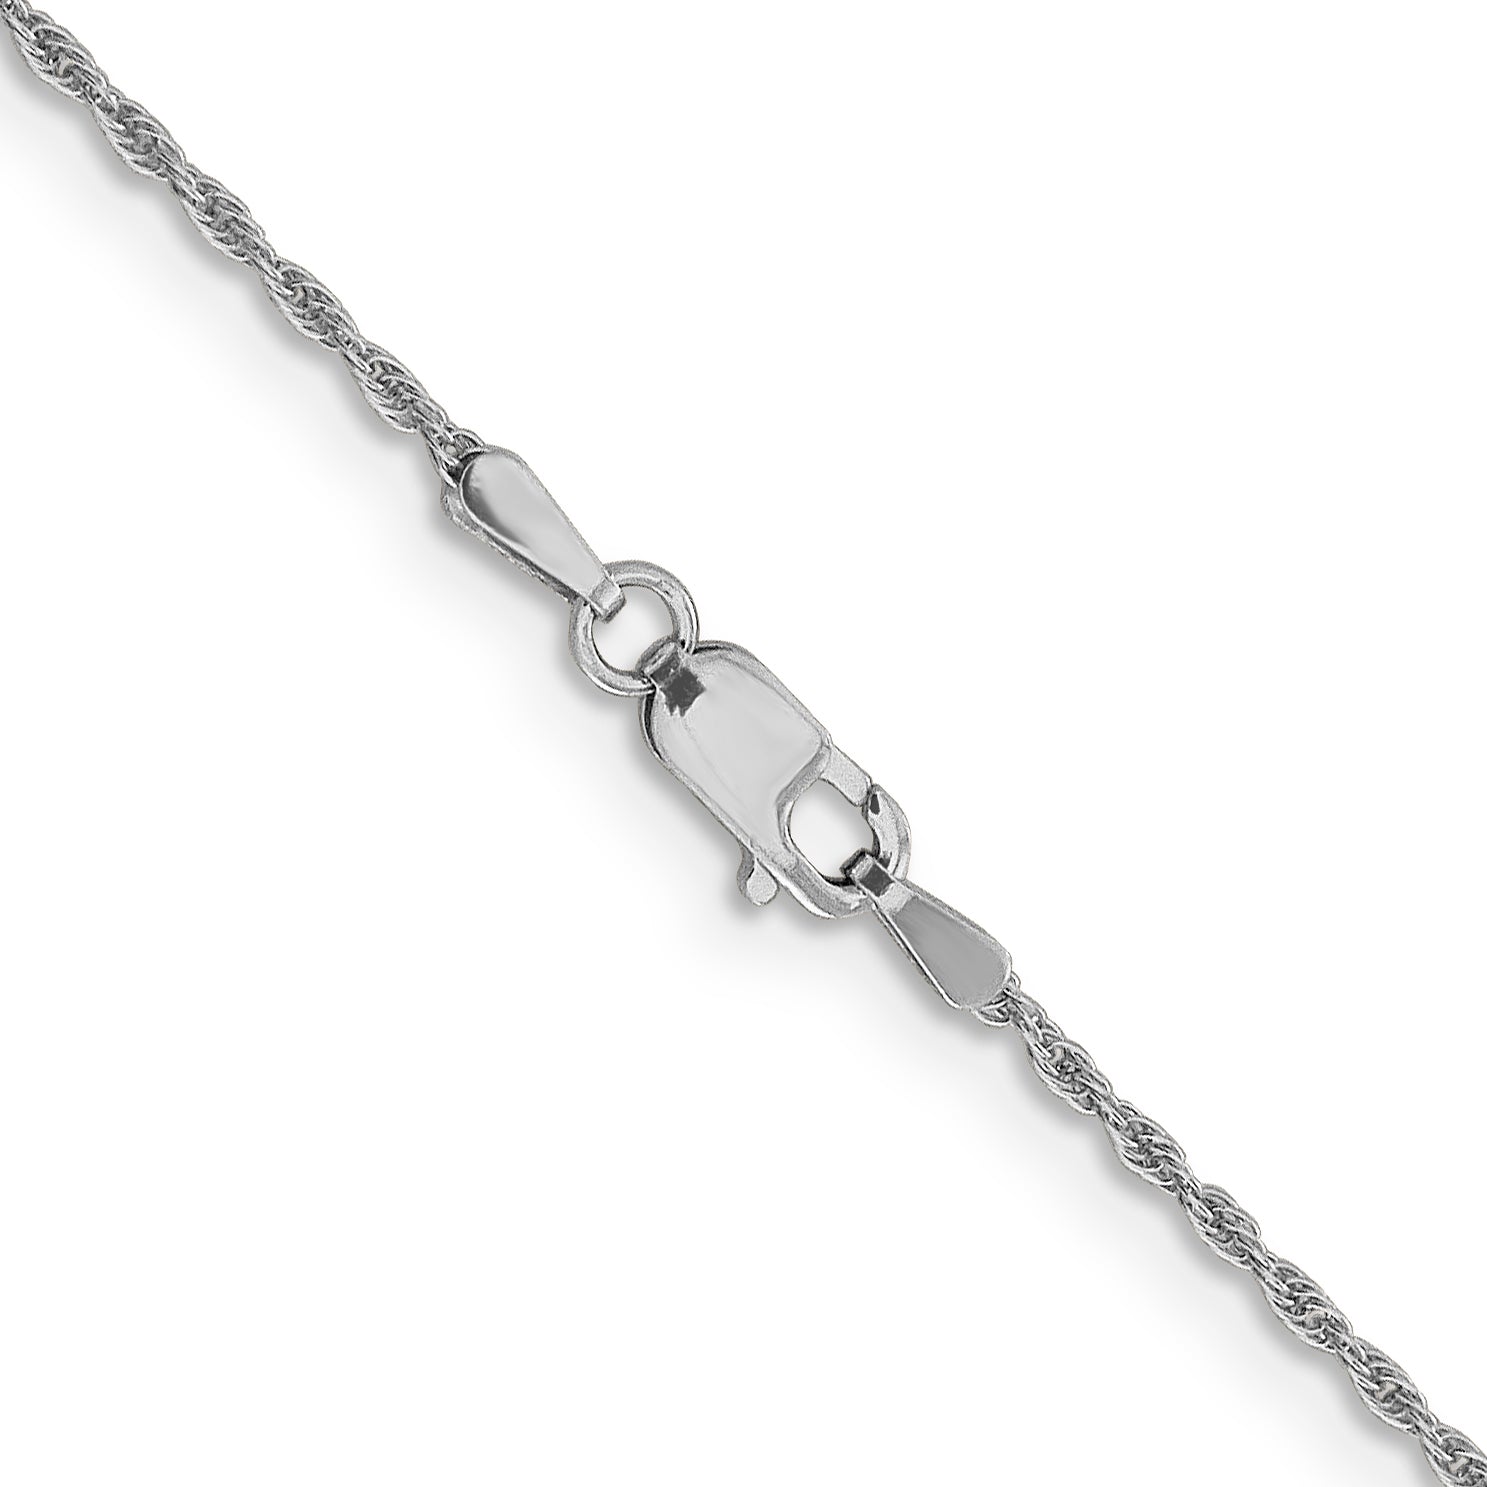 10K White Gold 1.2 mm Loose Rope Chain